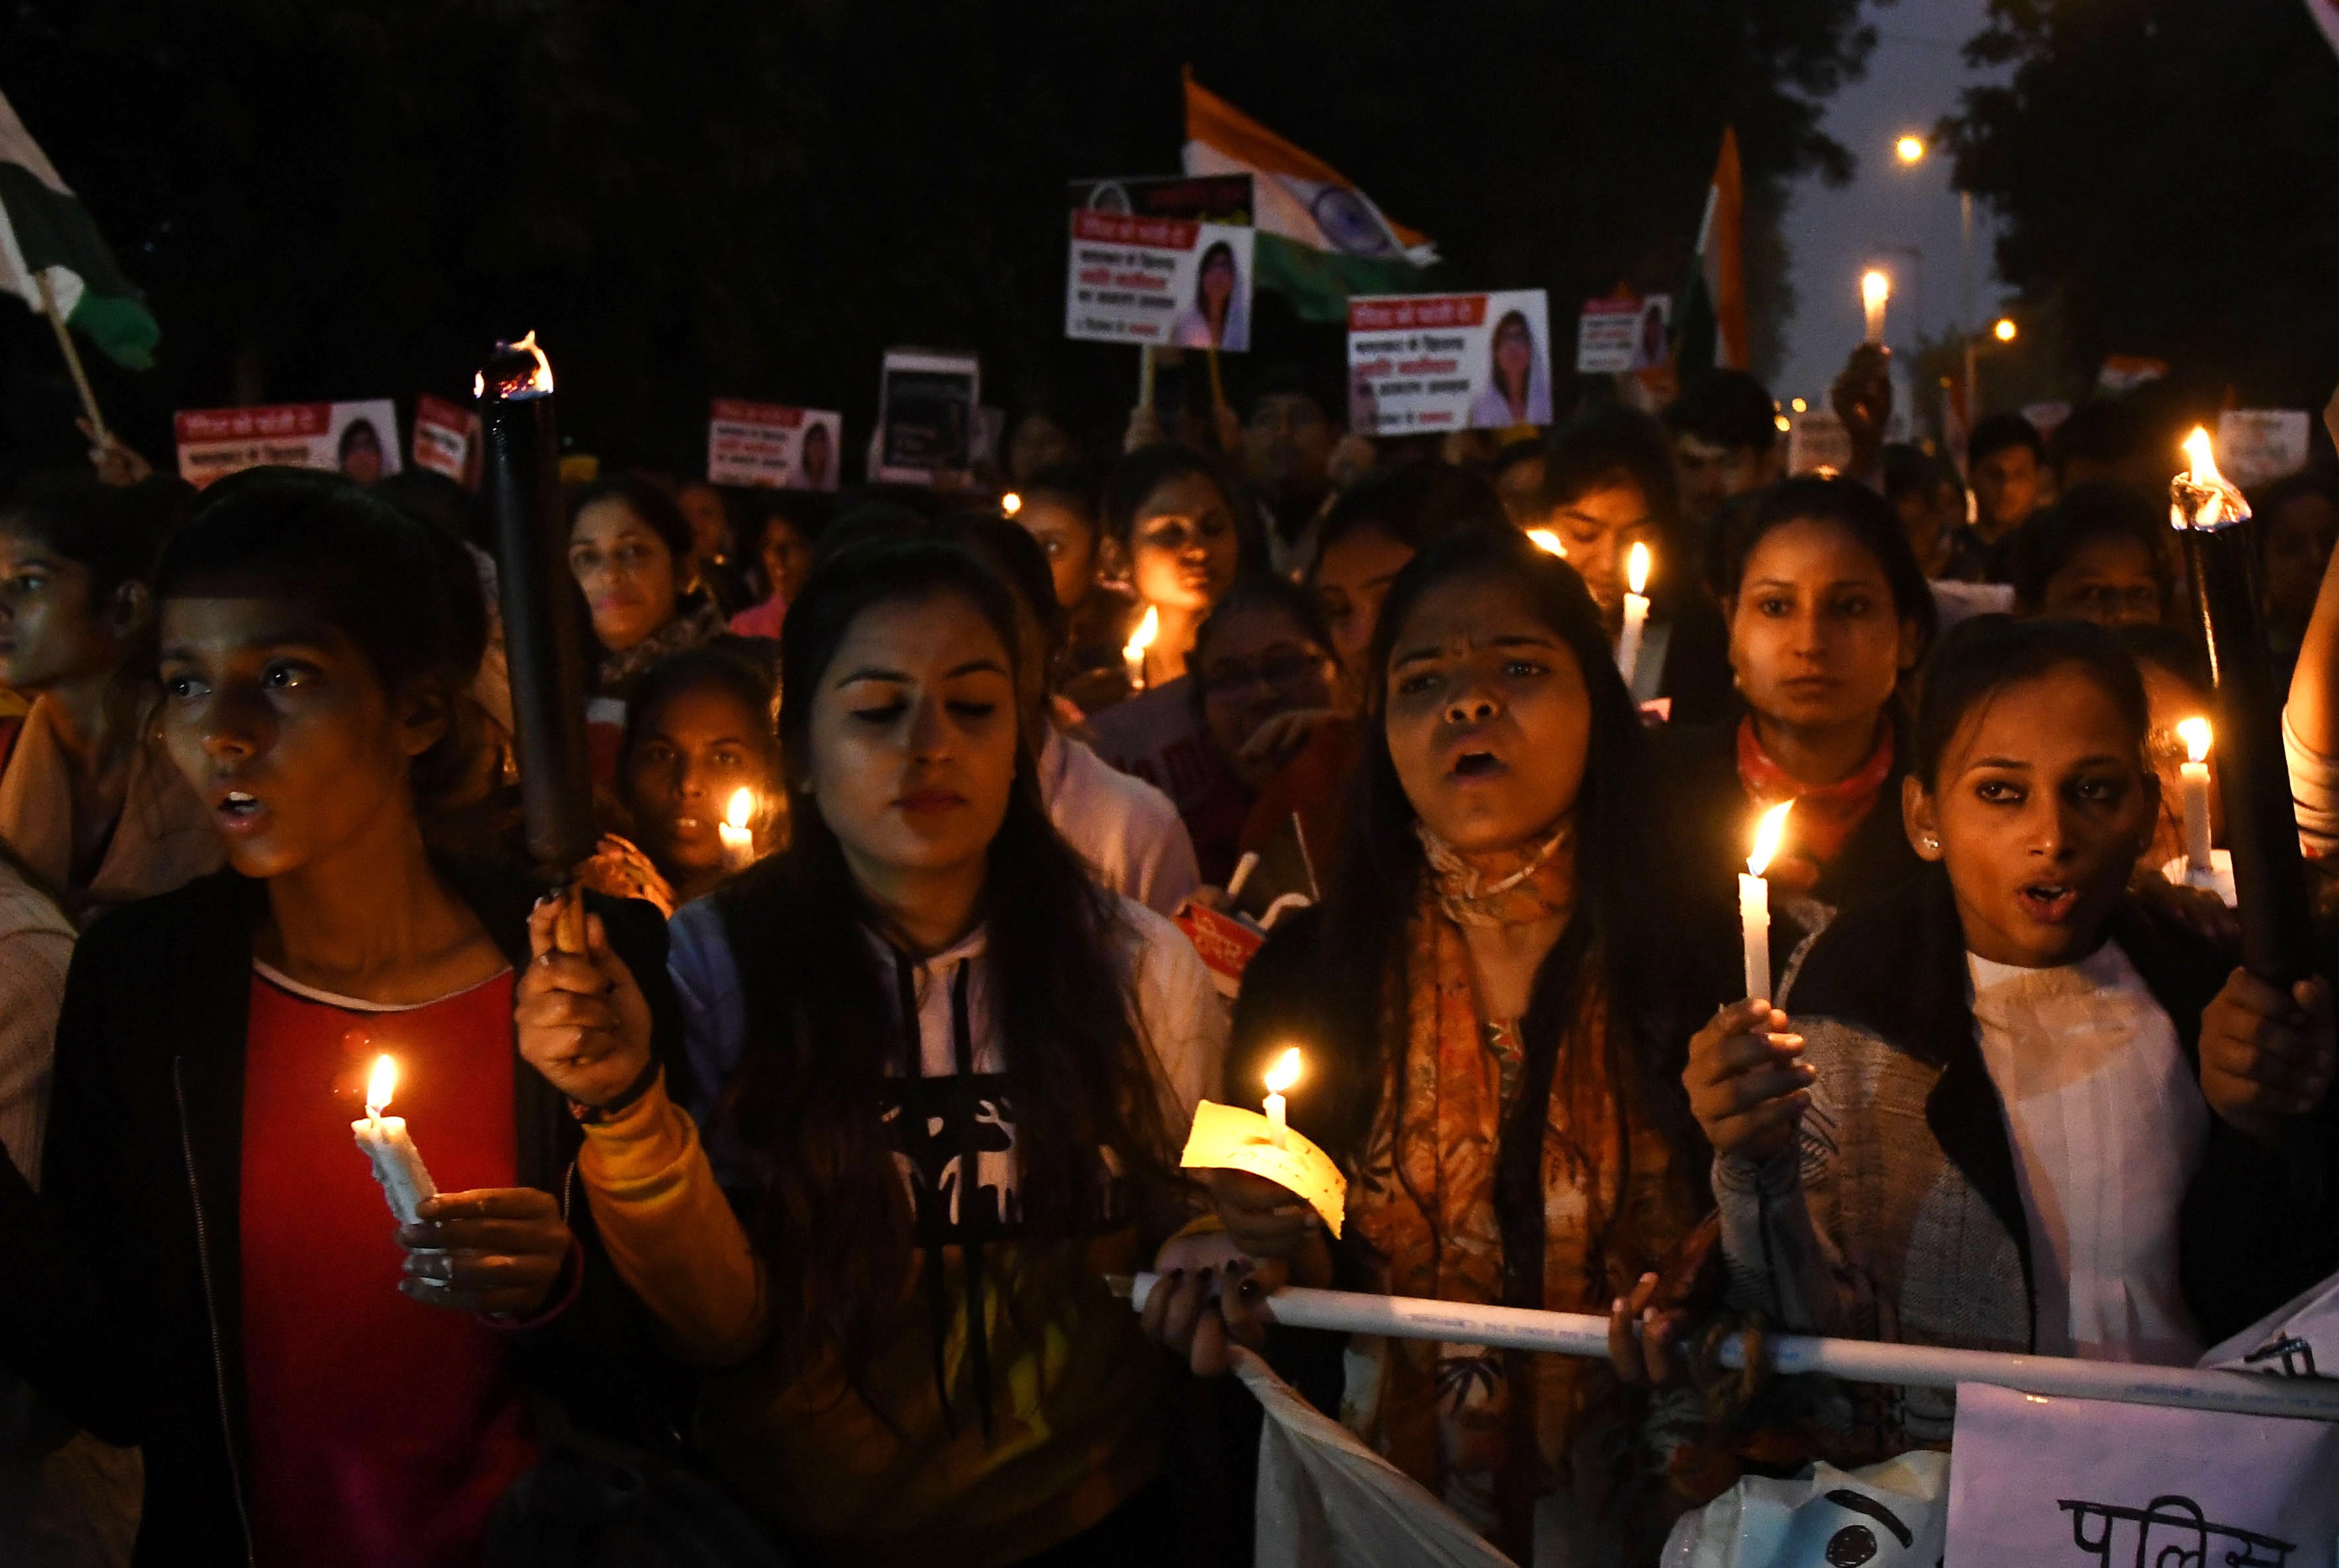 File image: Indian women rights activists during a candle light march in December 2019 to denounce violence against women